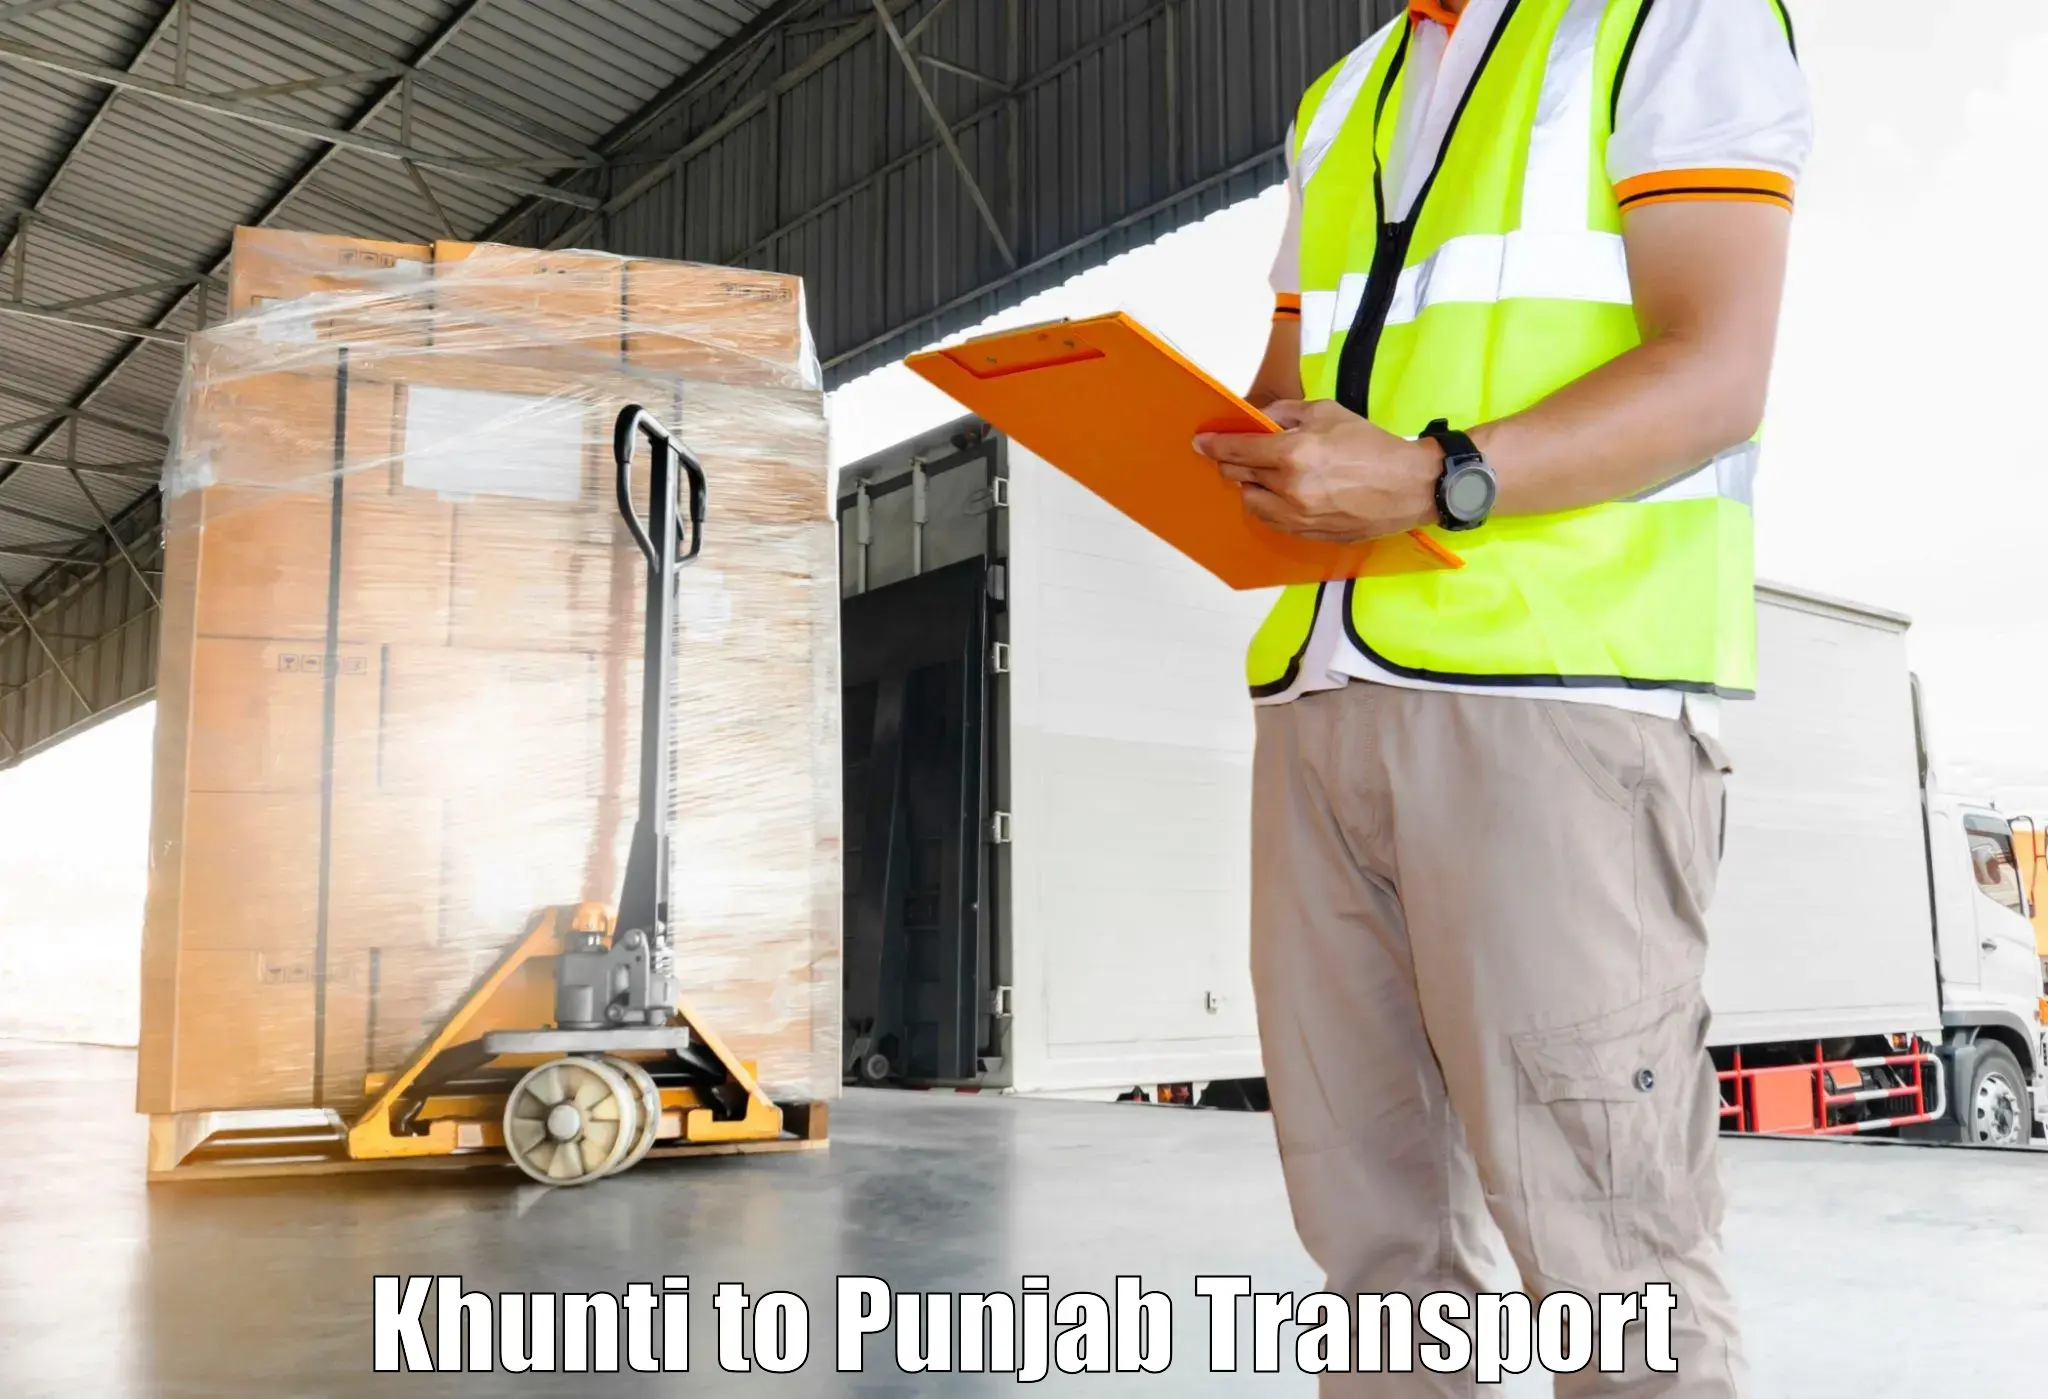 Container transport service Khunti to Mohali